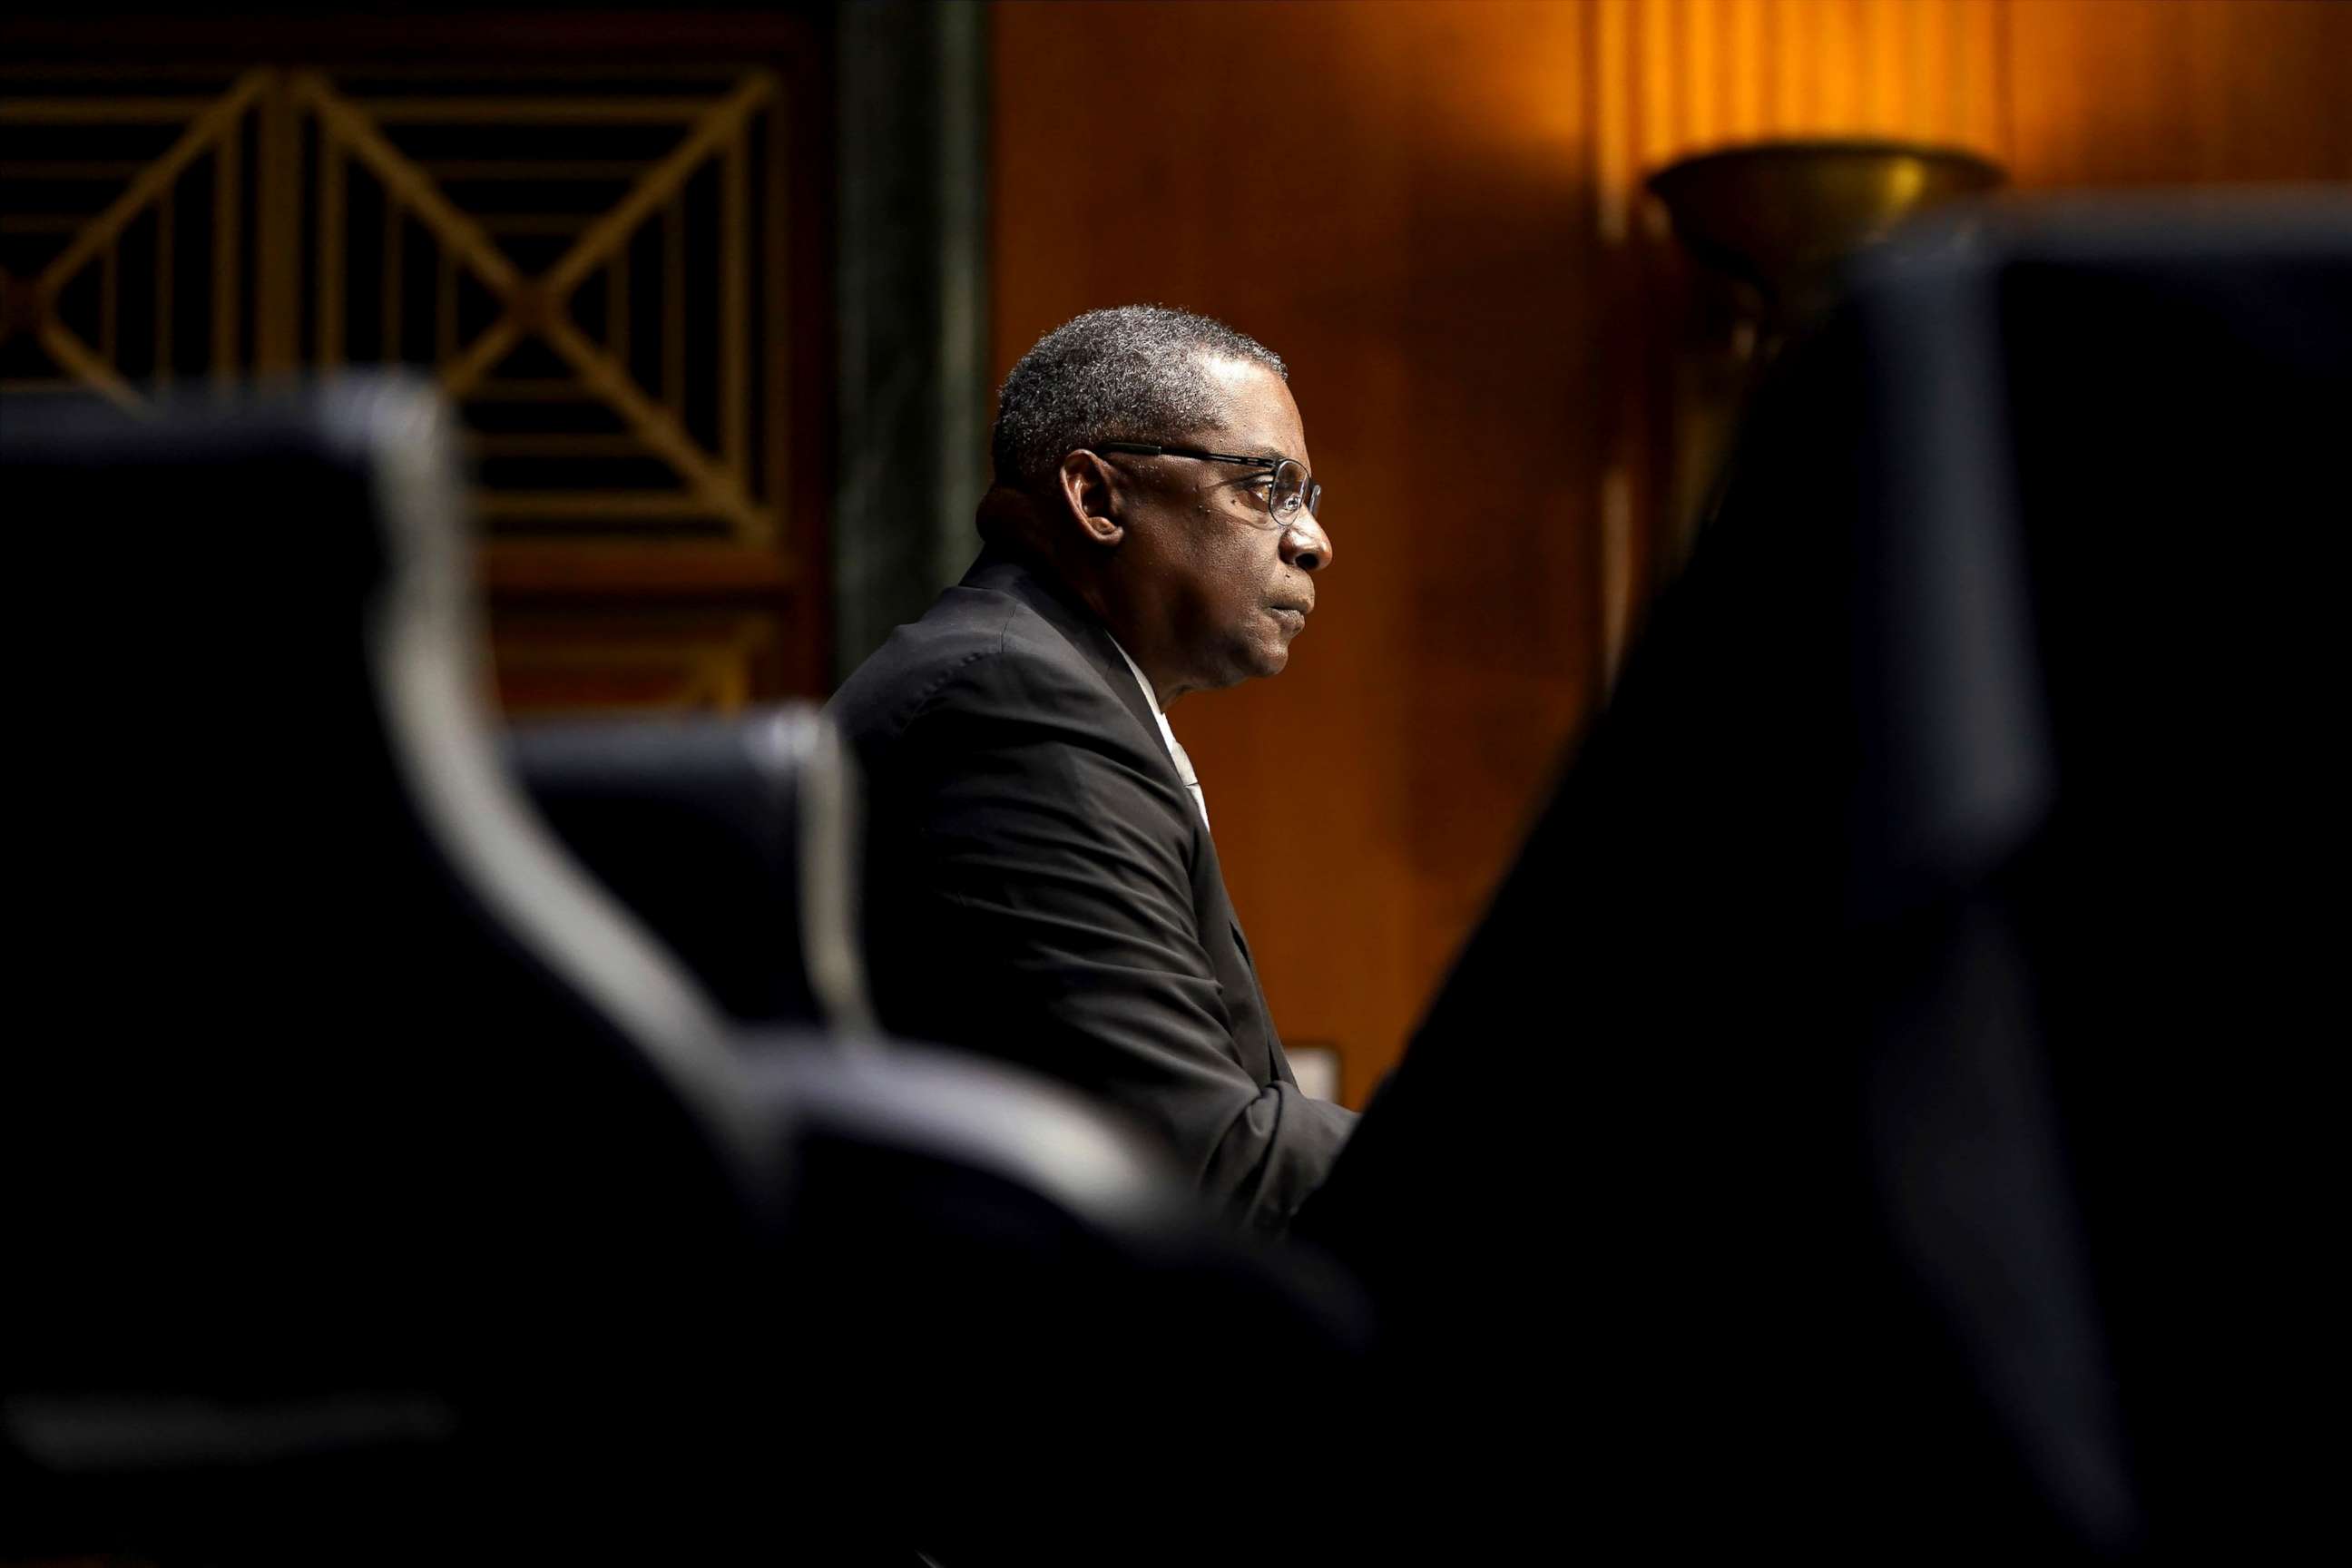 PHOTO: Secretary of Defense nominee Lloyd Austin listens during his conformation hearing before the Senate Armed Services Committee on Capitol Hill in Washington, Jan. 19, 2021.